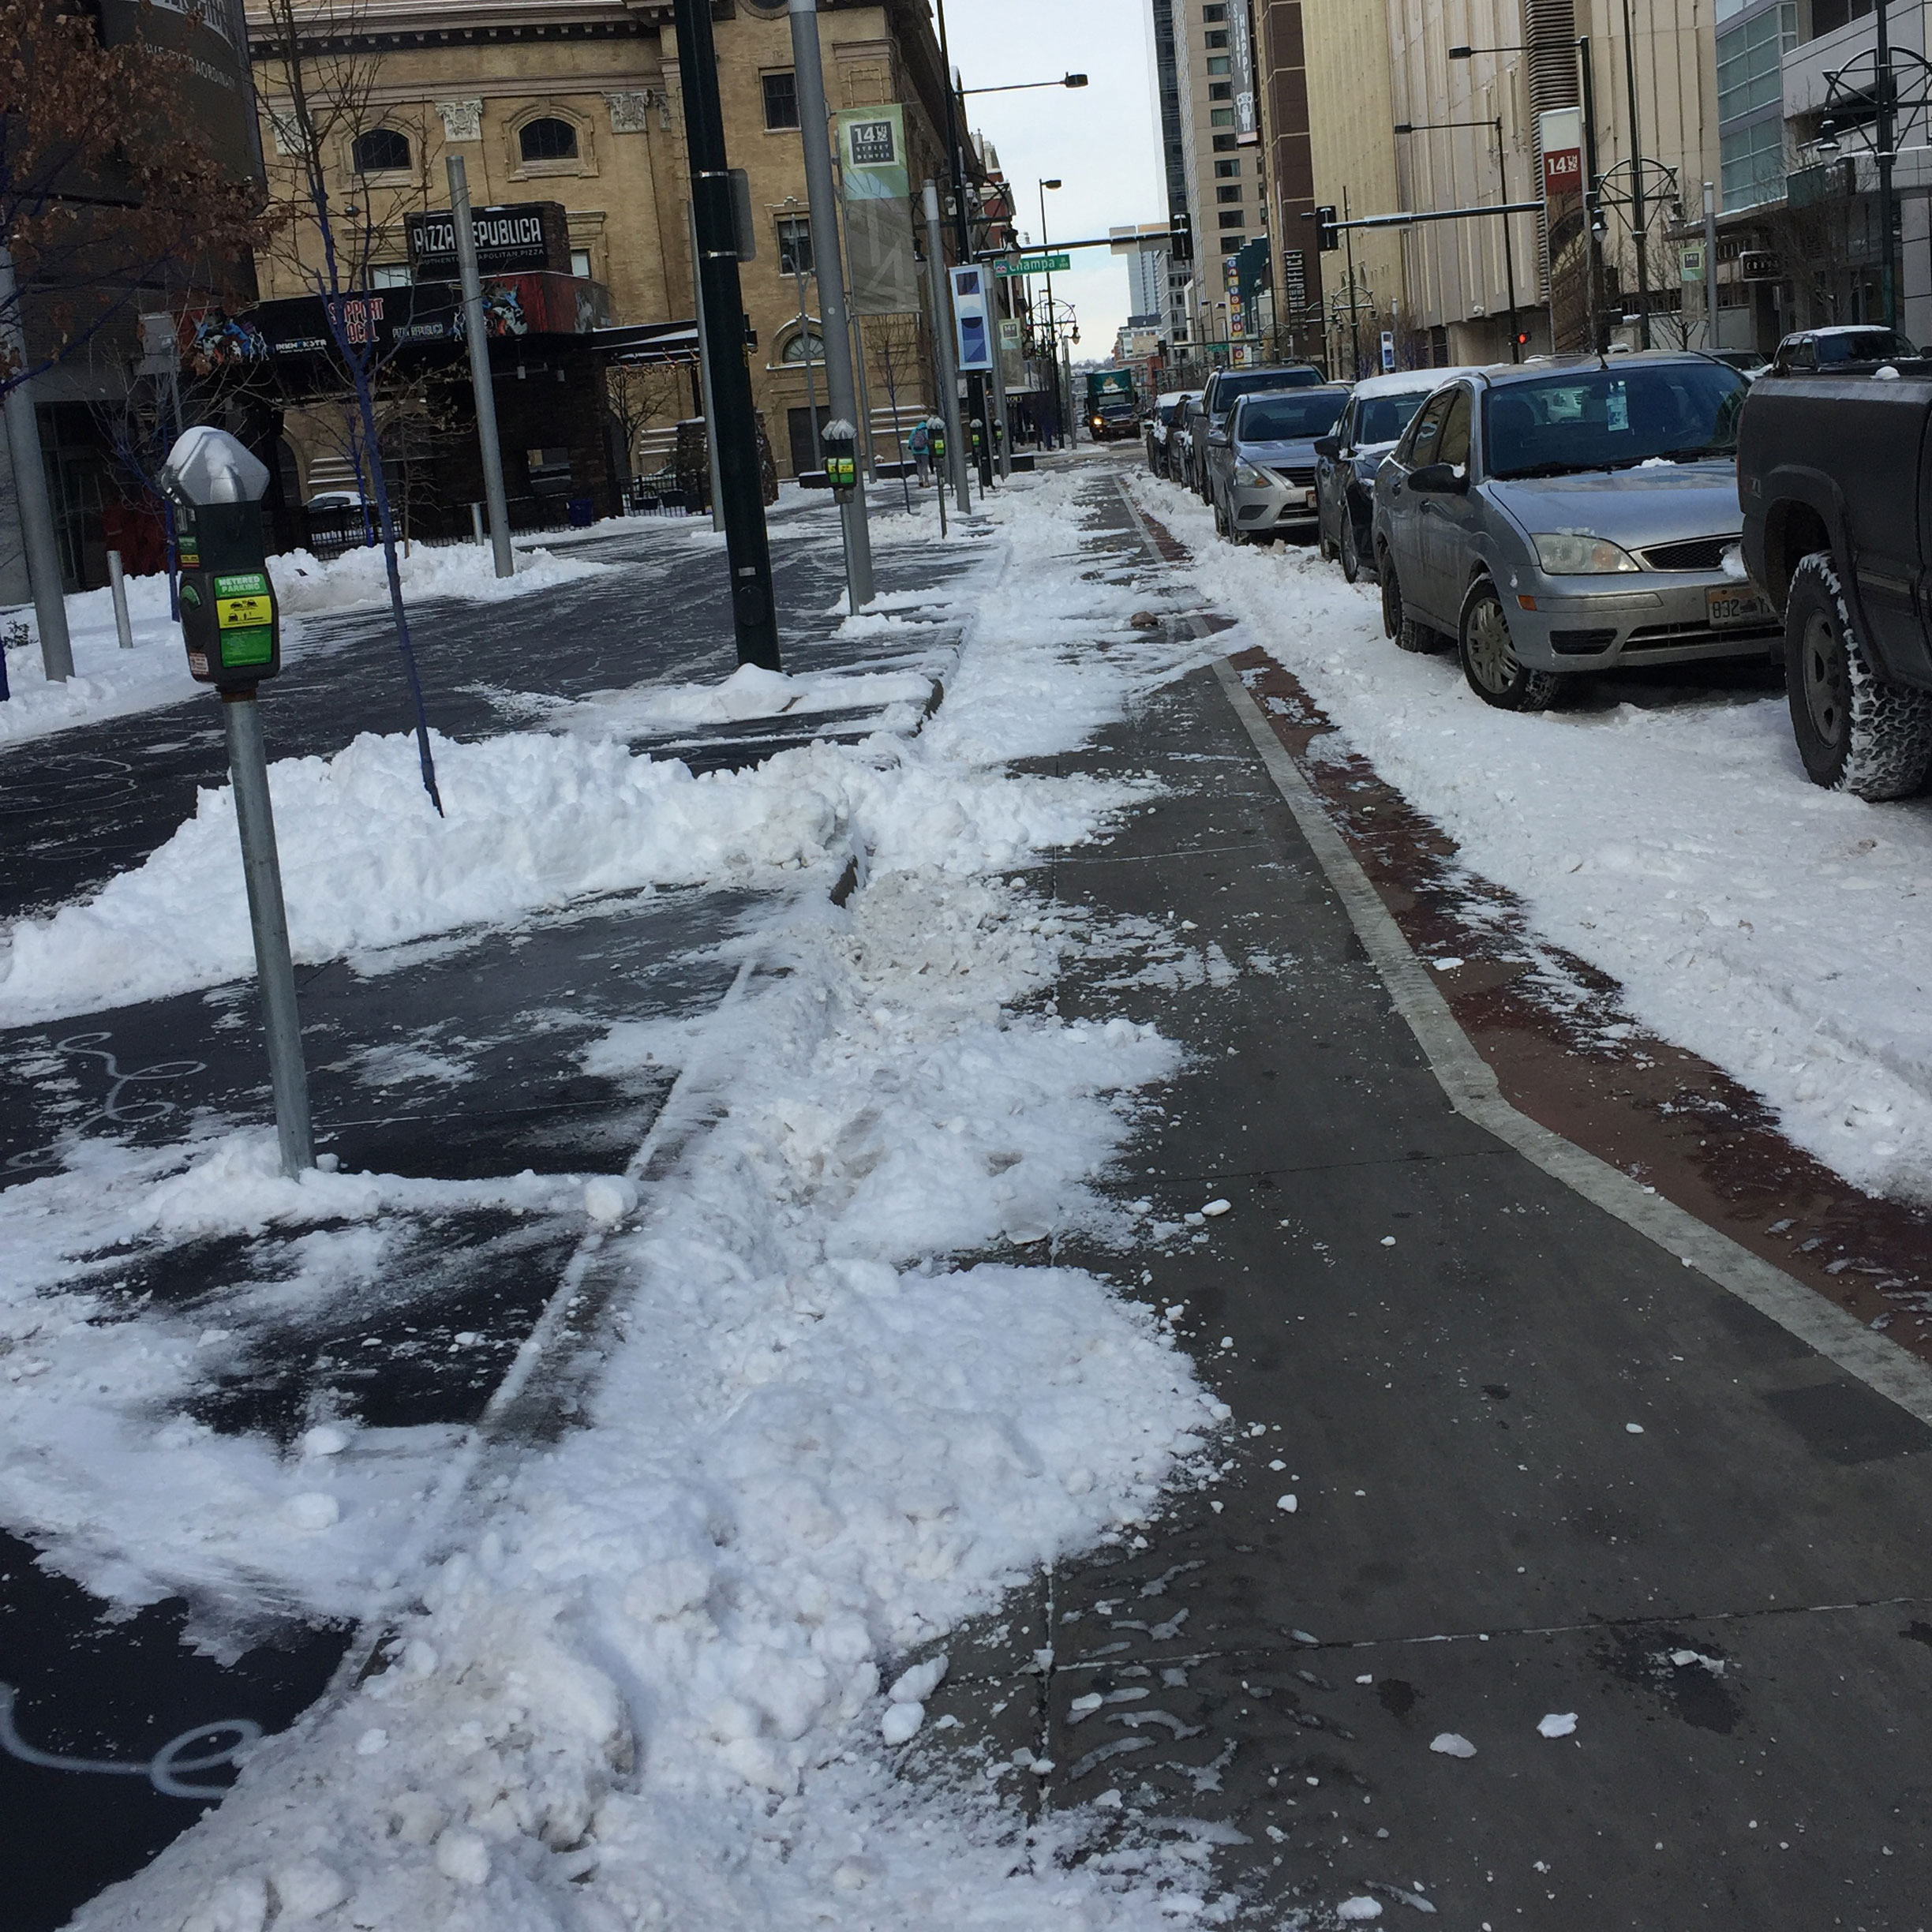 A bike lane with snow piles in it.